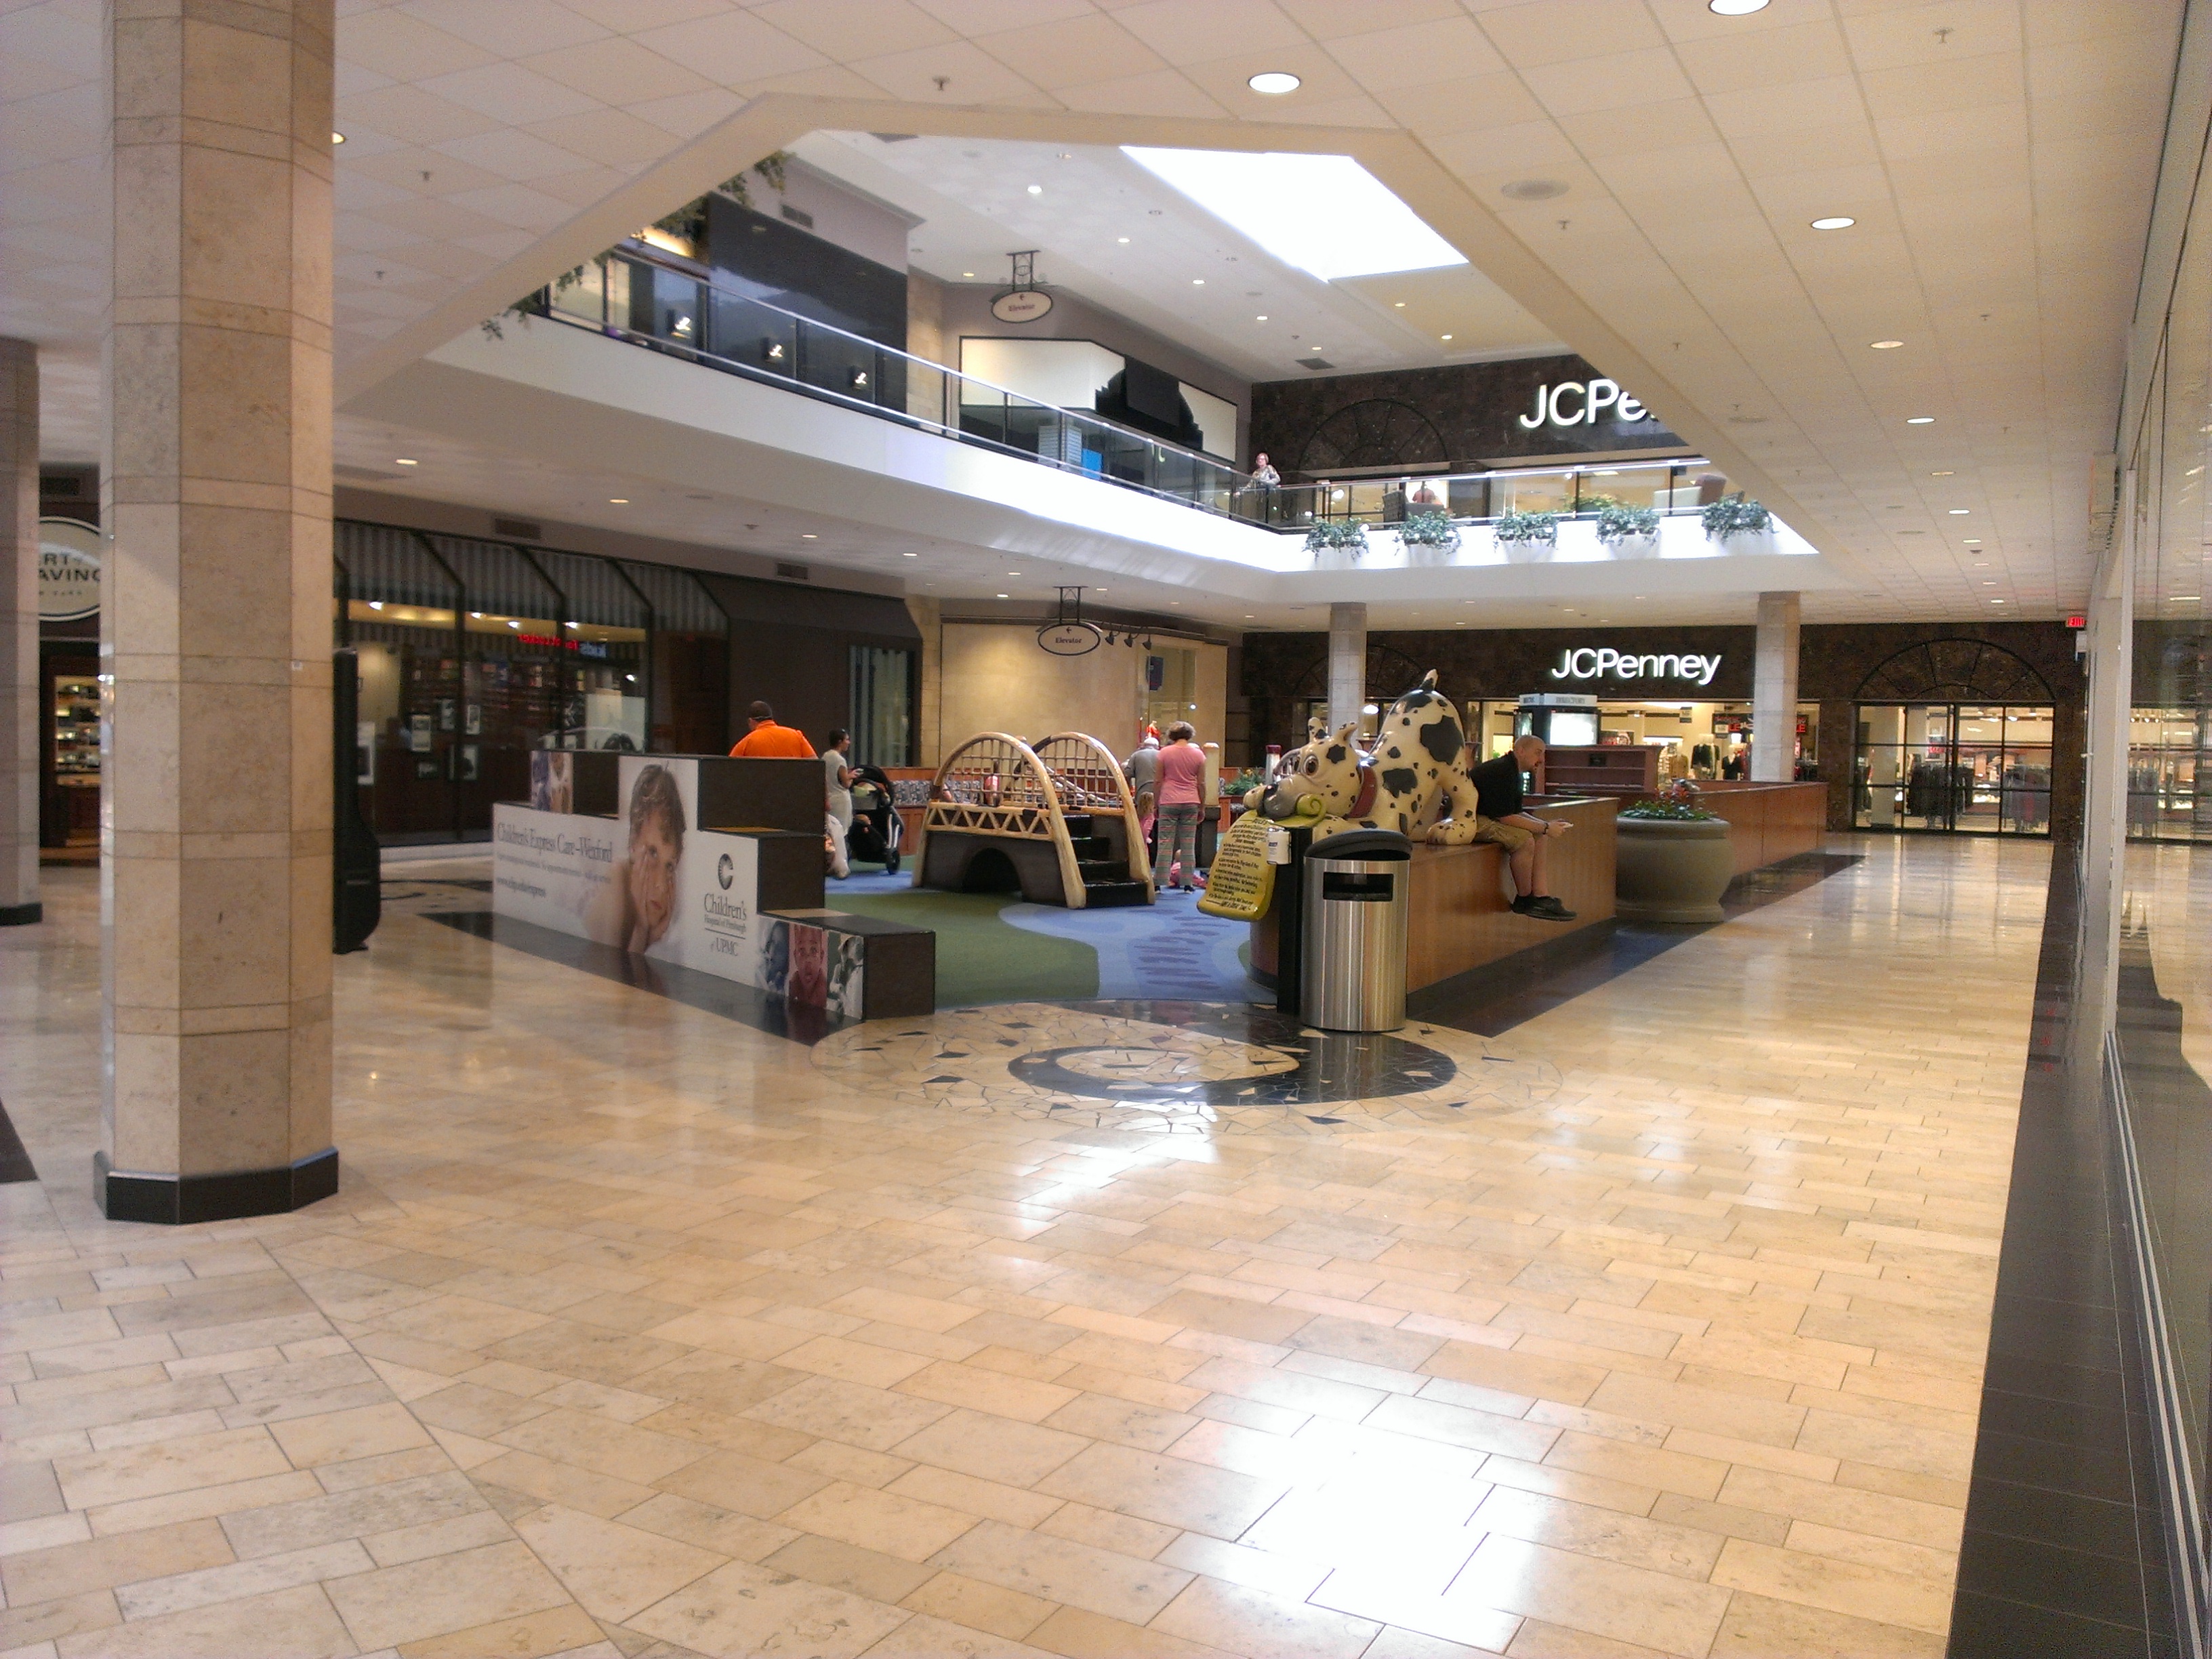 PennsylvAsia: This year's trend replaces 2015's at Ross Park Mall.